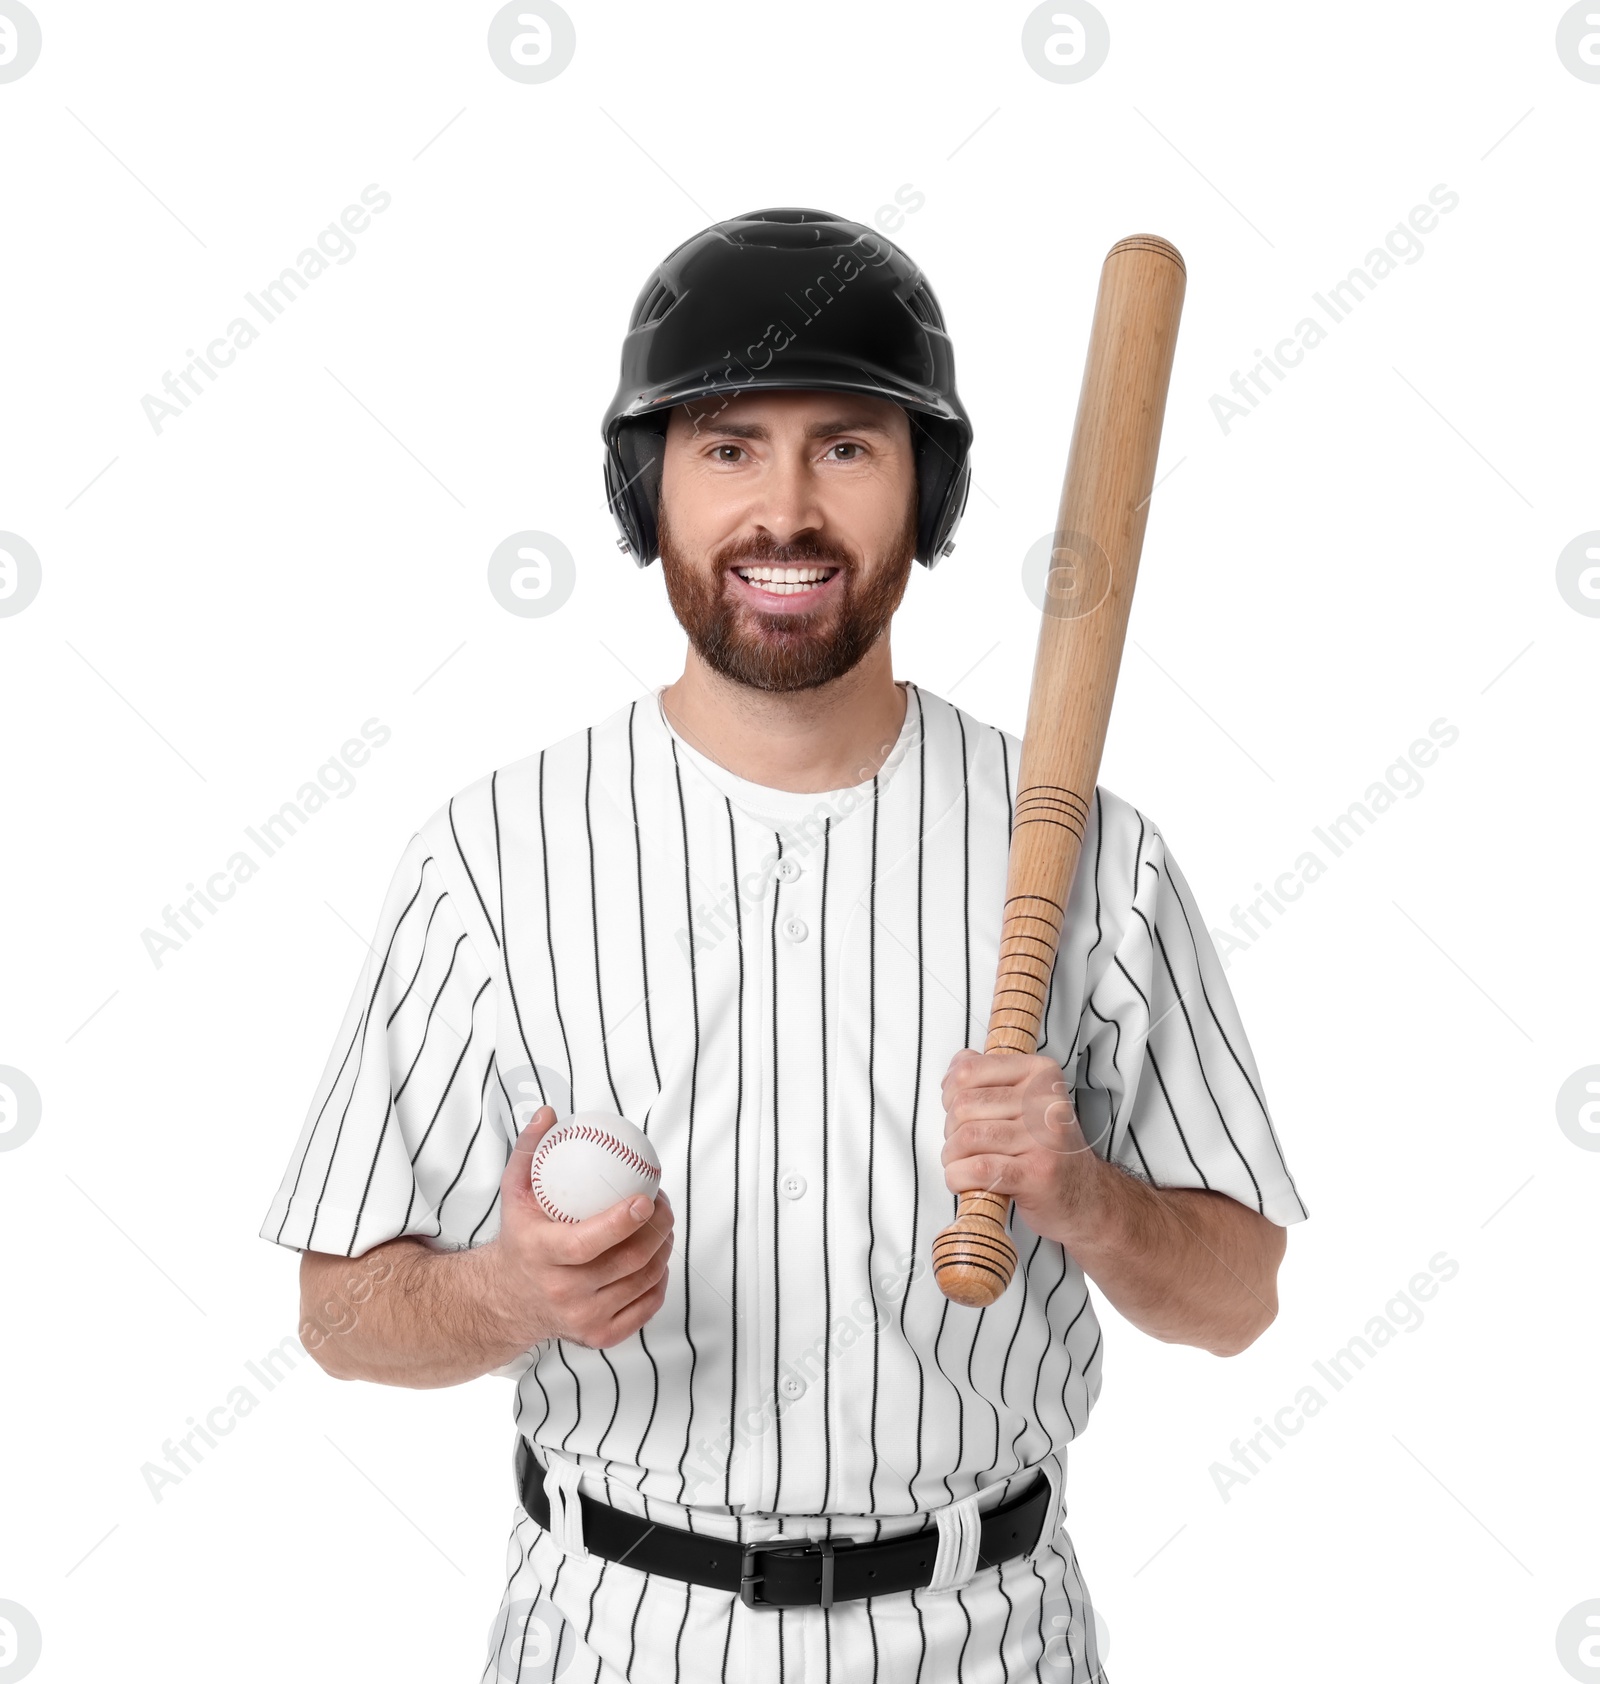 Photo of Baseball player with bat and ball on white background